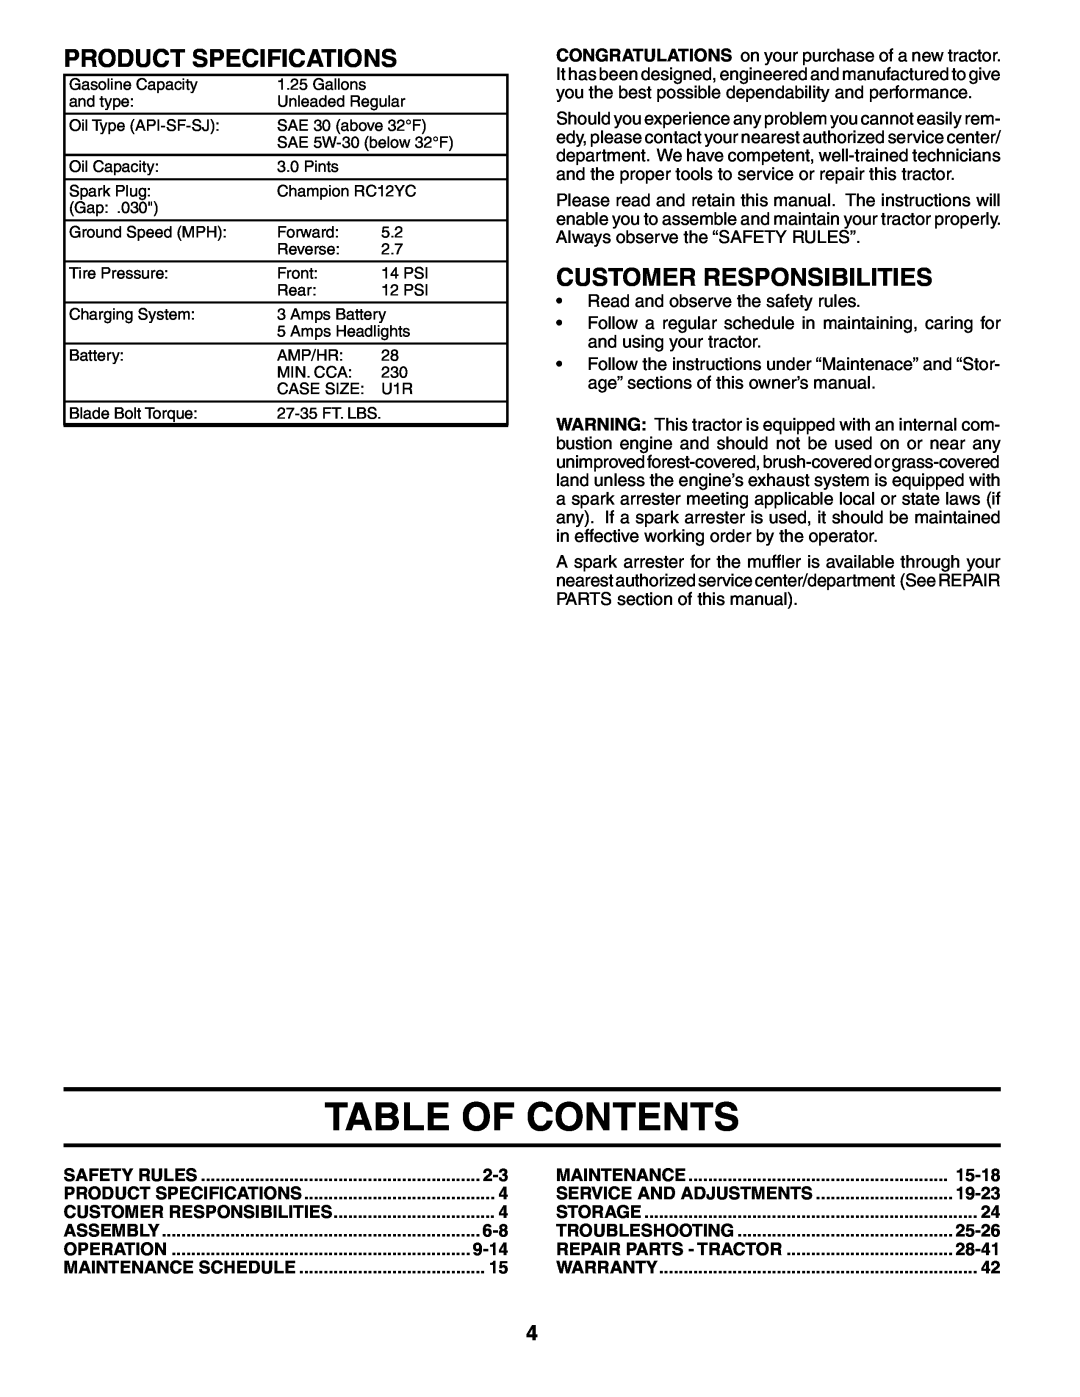 Poulan PO175H42STB manual Table Of Contents, Product Specifications, Customer Responsibilities 